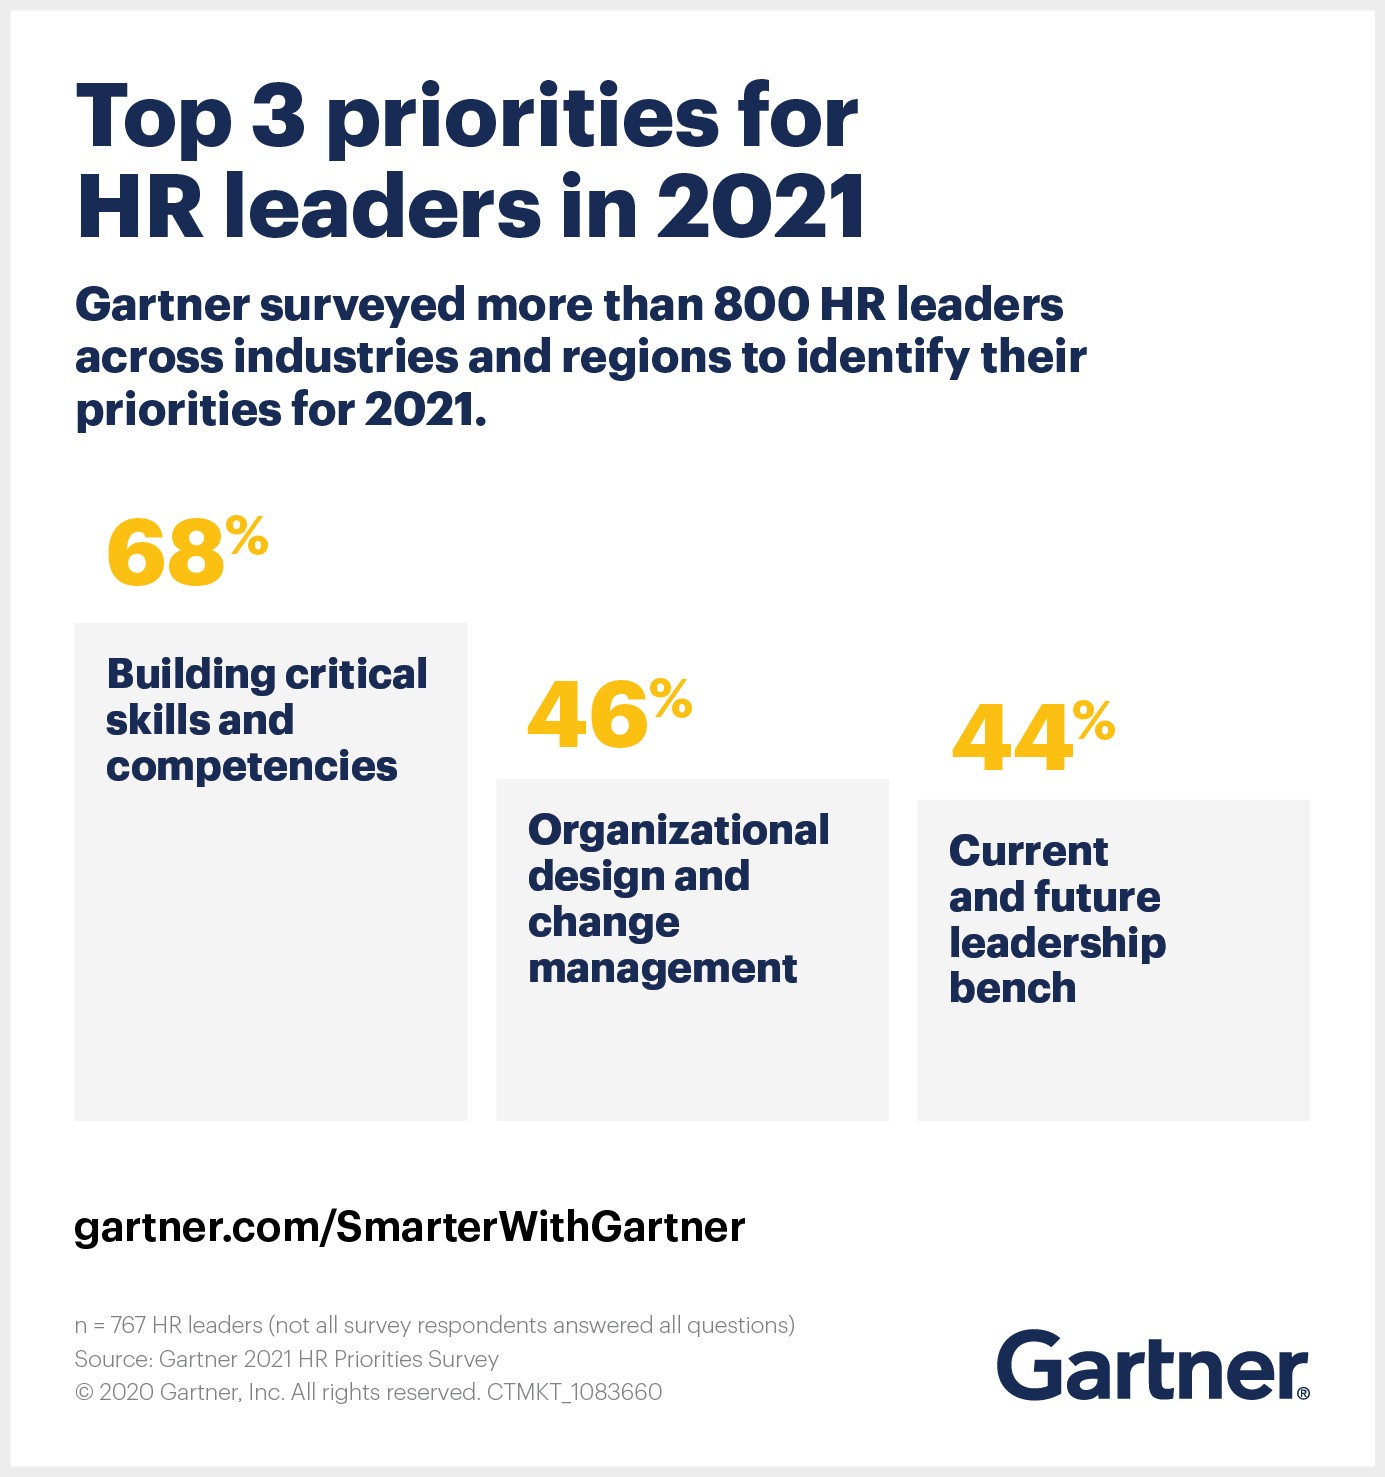 Gartner surveyed more than 800 HR leaders in late-2020 about their priorities for 2021. Building critical skills and competencies topped the list.